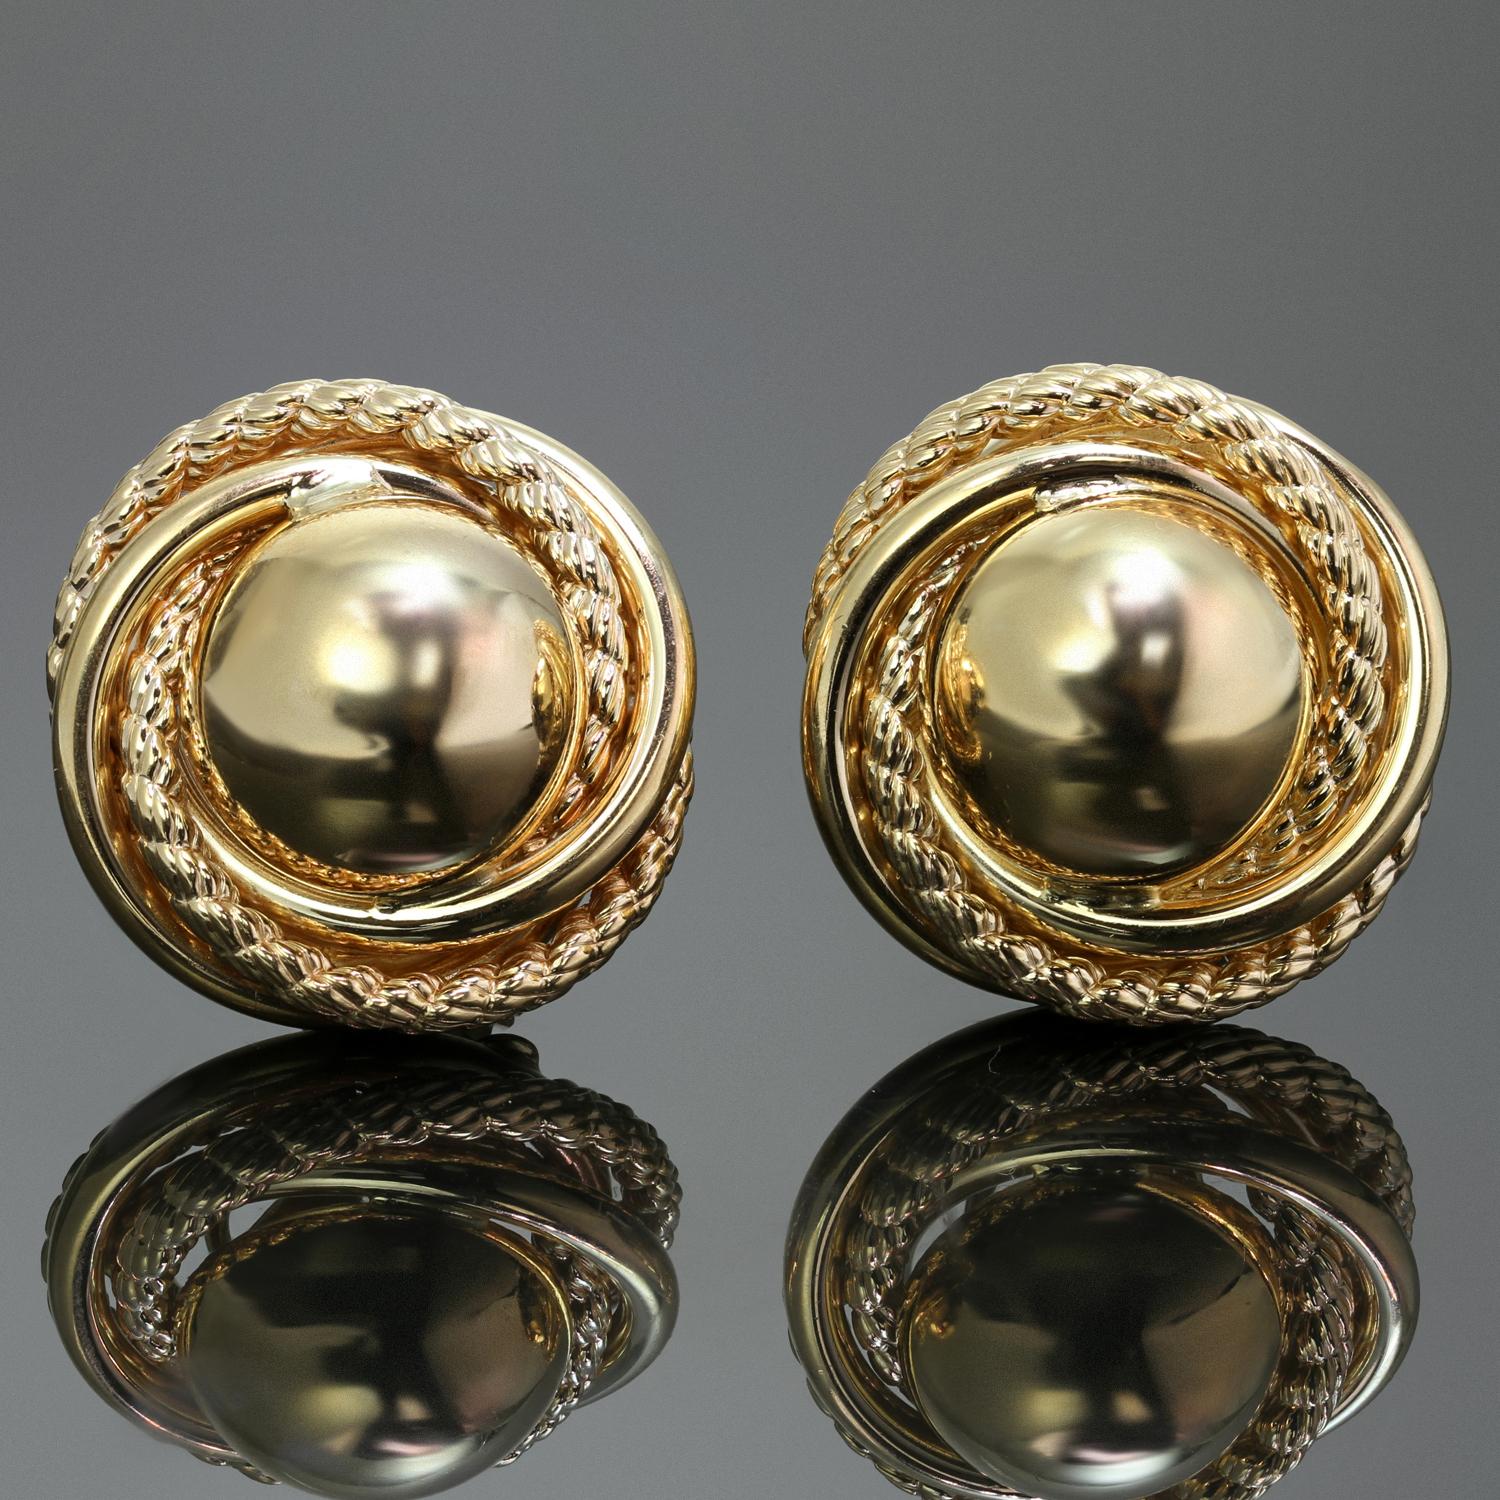 These elegant retro lever-back earrings are crafted in 14k yellow gold and feature a round dome button design surrounded by a polished and textural swirling elements. Made in United States circa 1980s. Measurements: 1.02